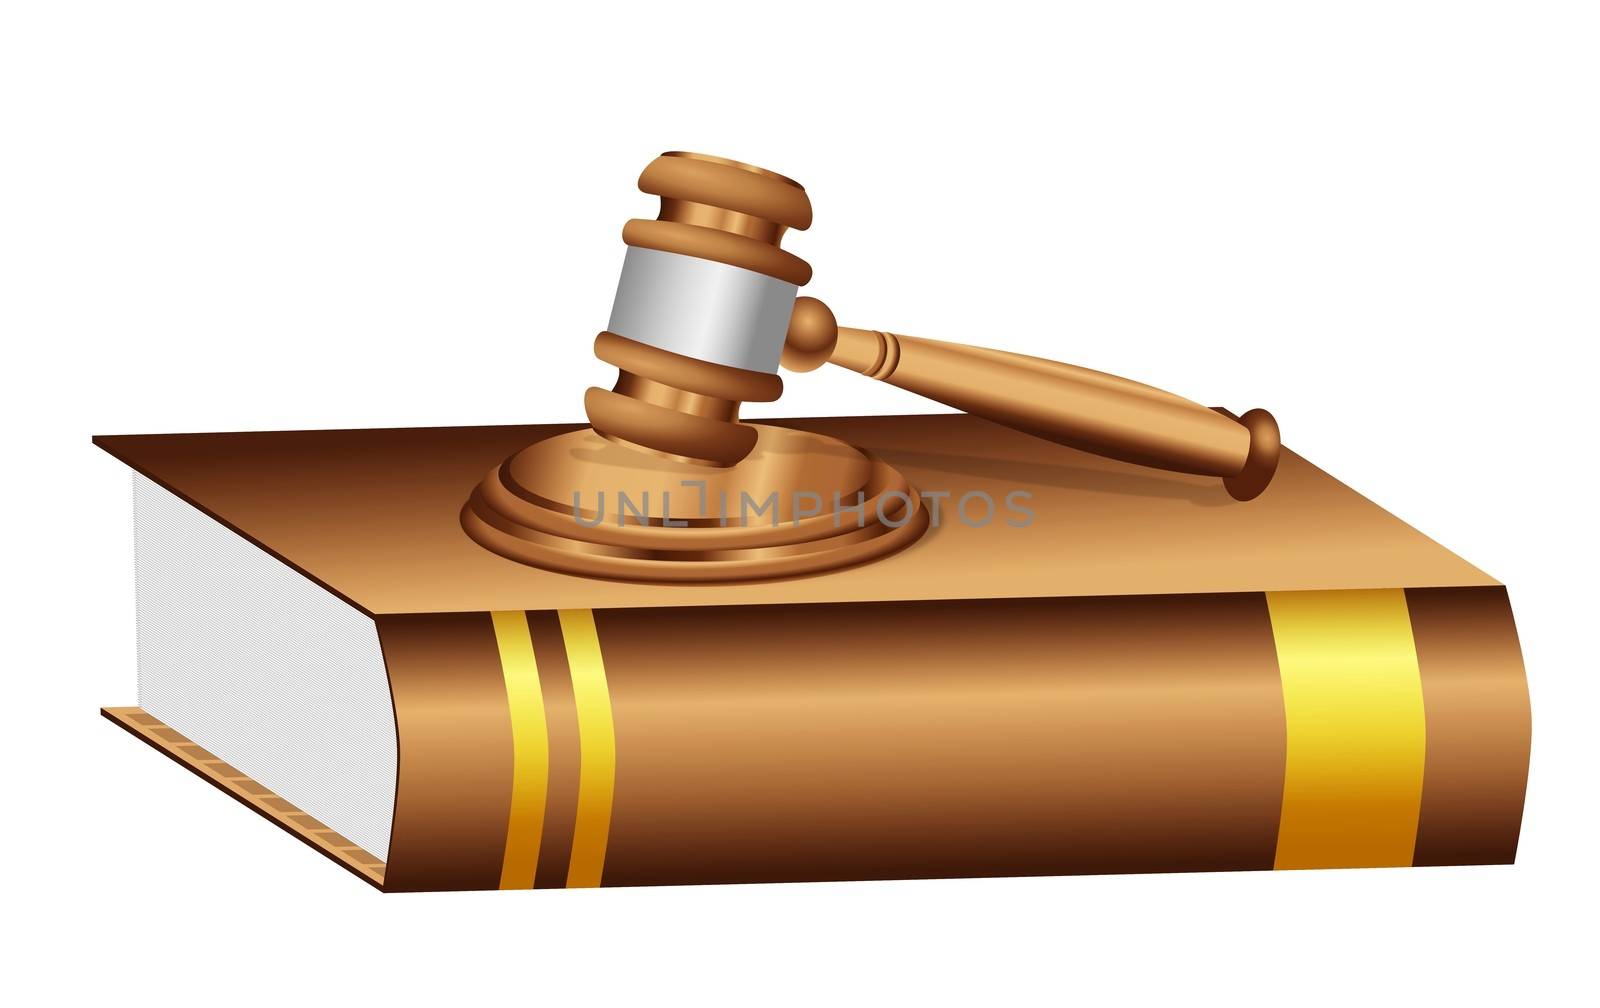 A judge gavel mallet placed on a brown book with blank golden label
